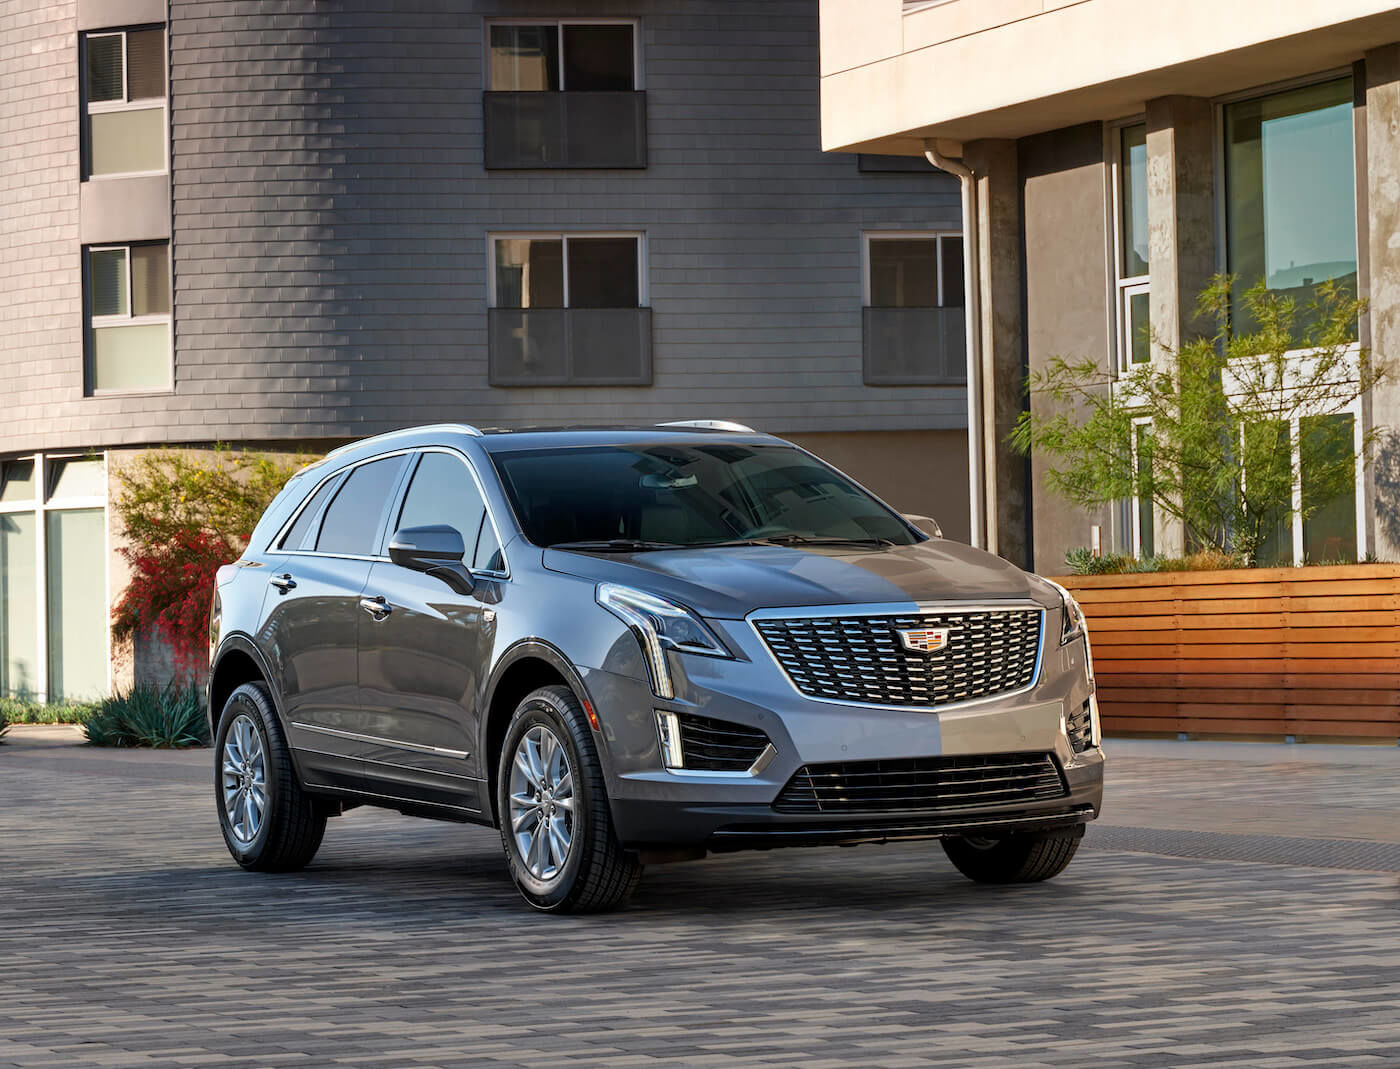 The gray color 2021 Cadillac XT5 SUV parked on a paving stone